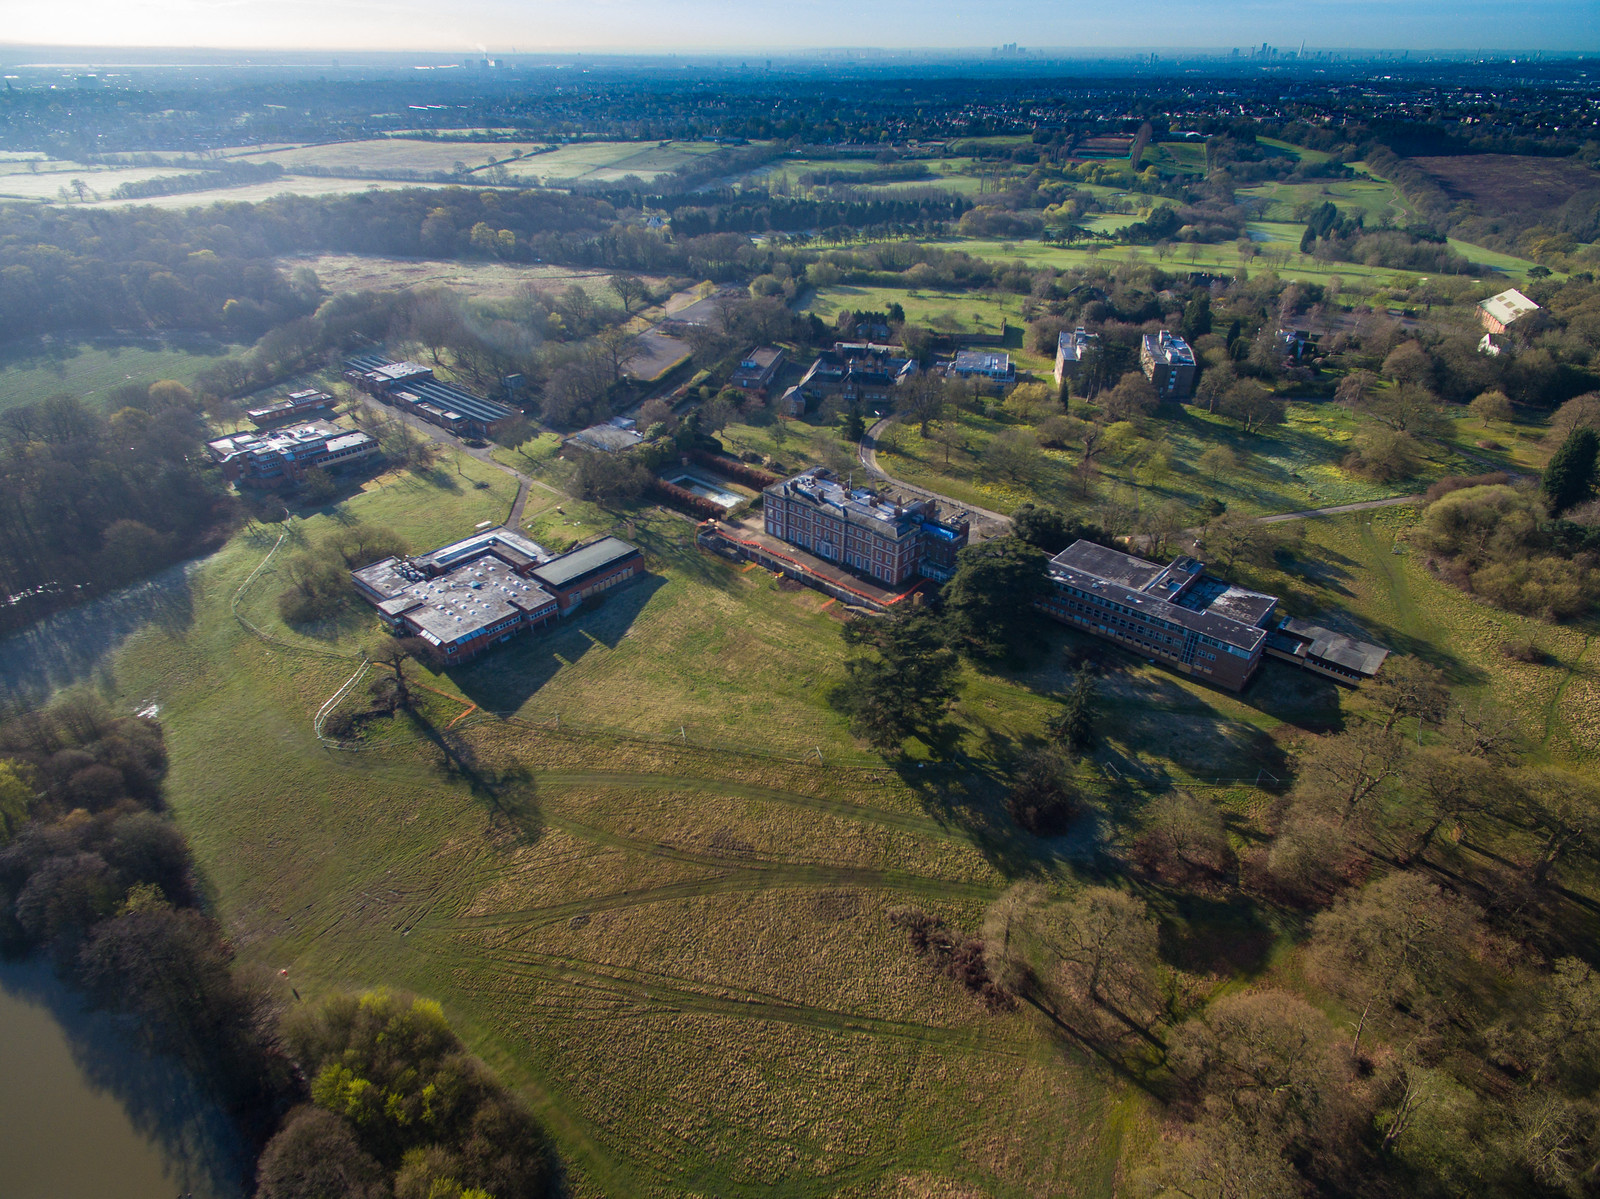 Trent Park Campus from the Air